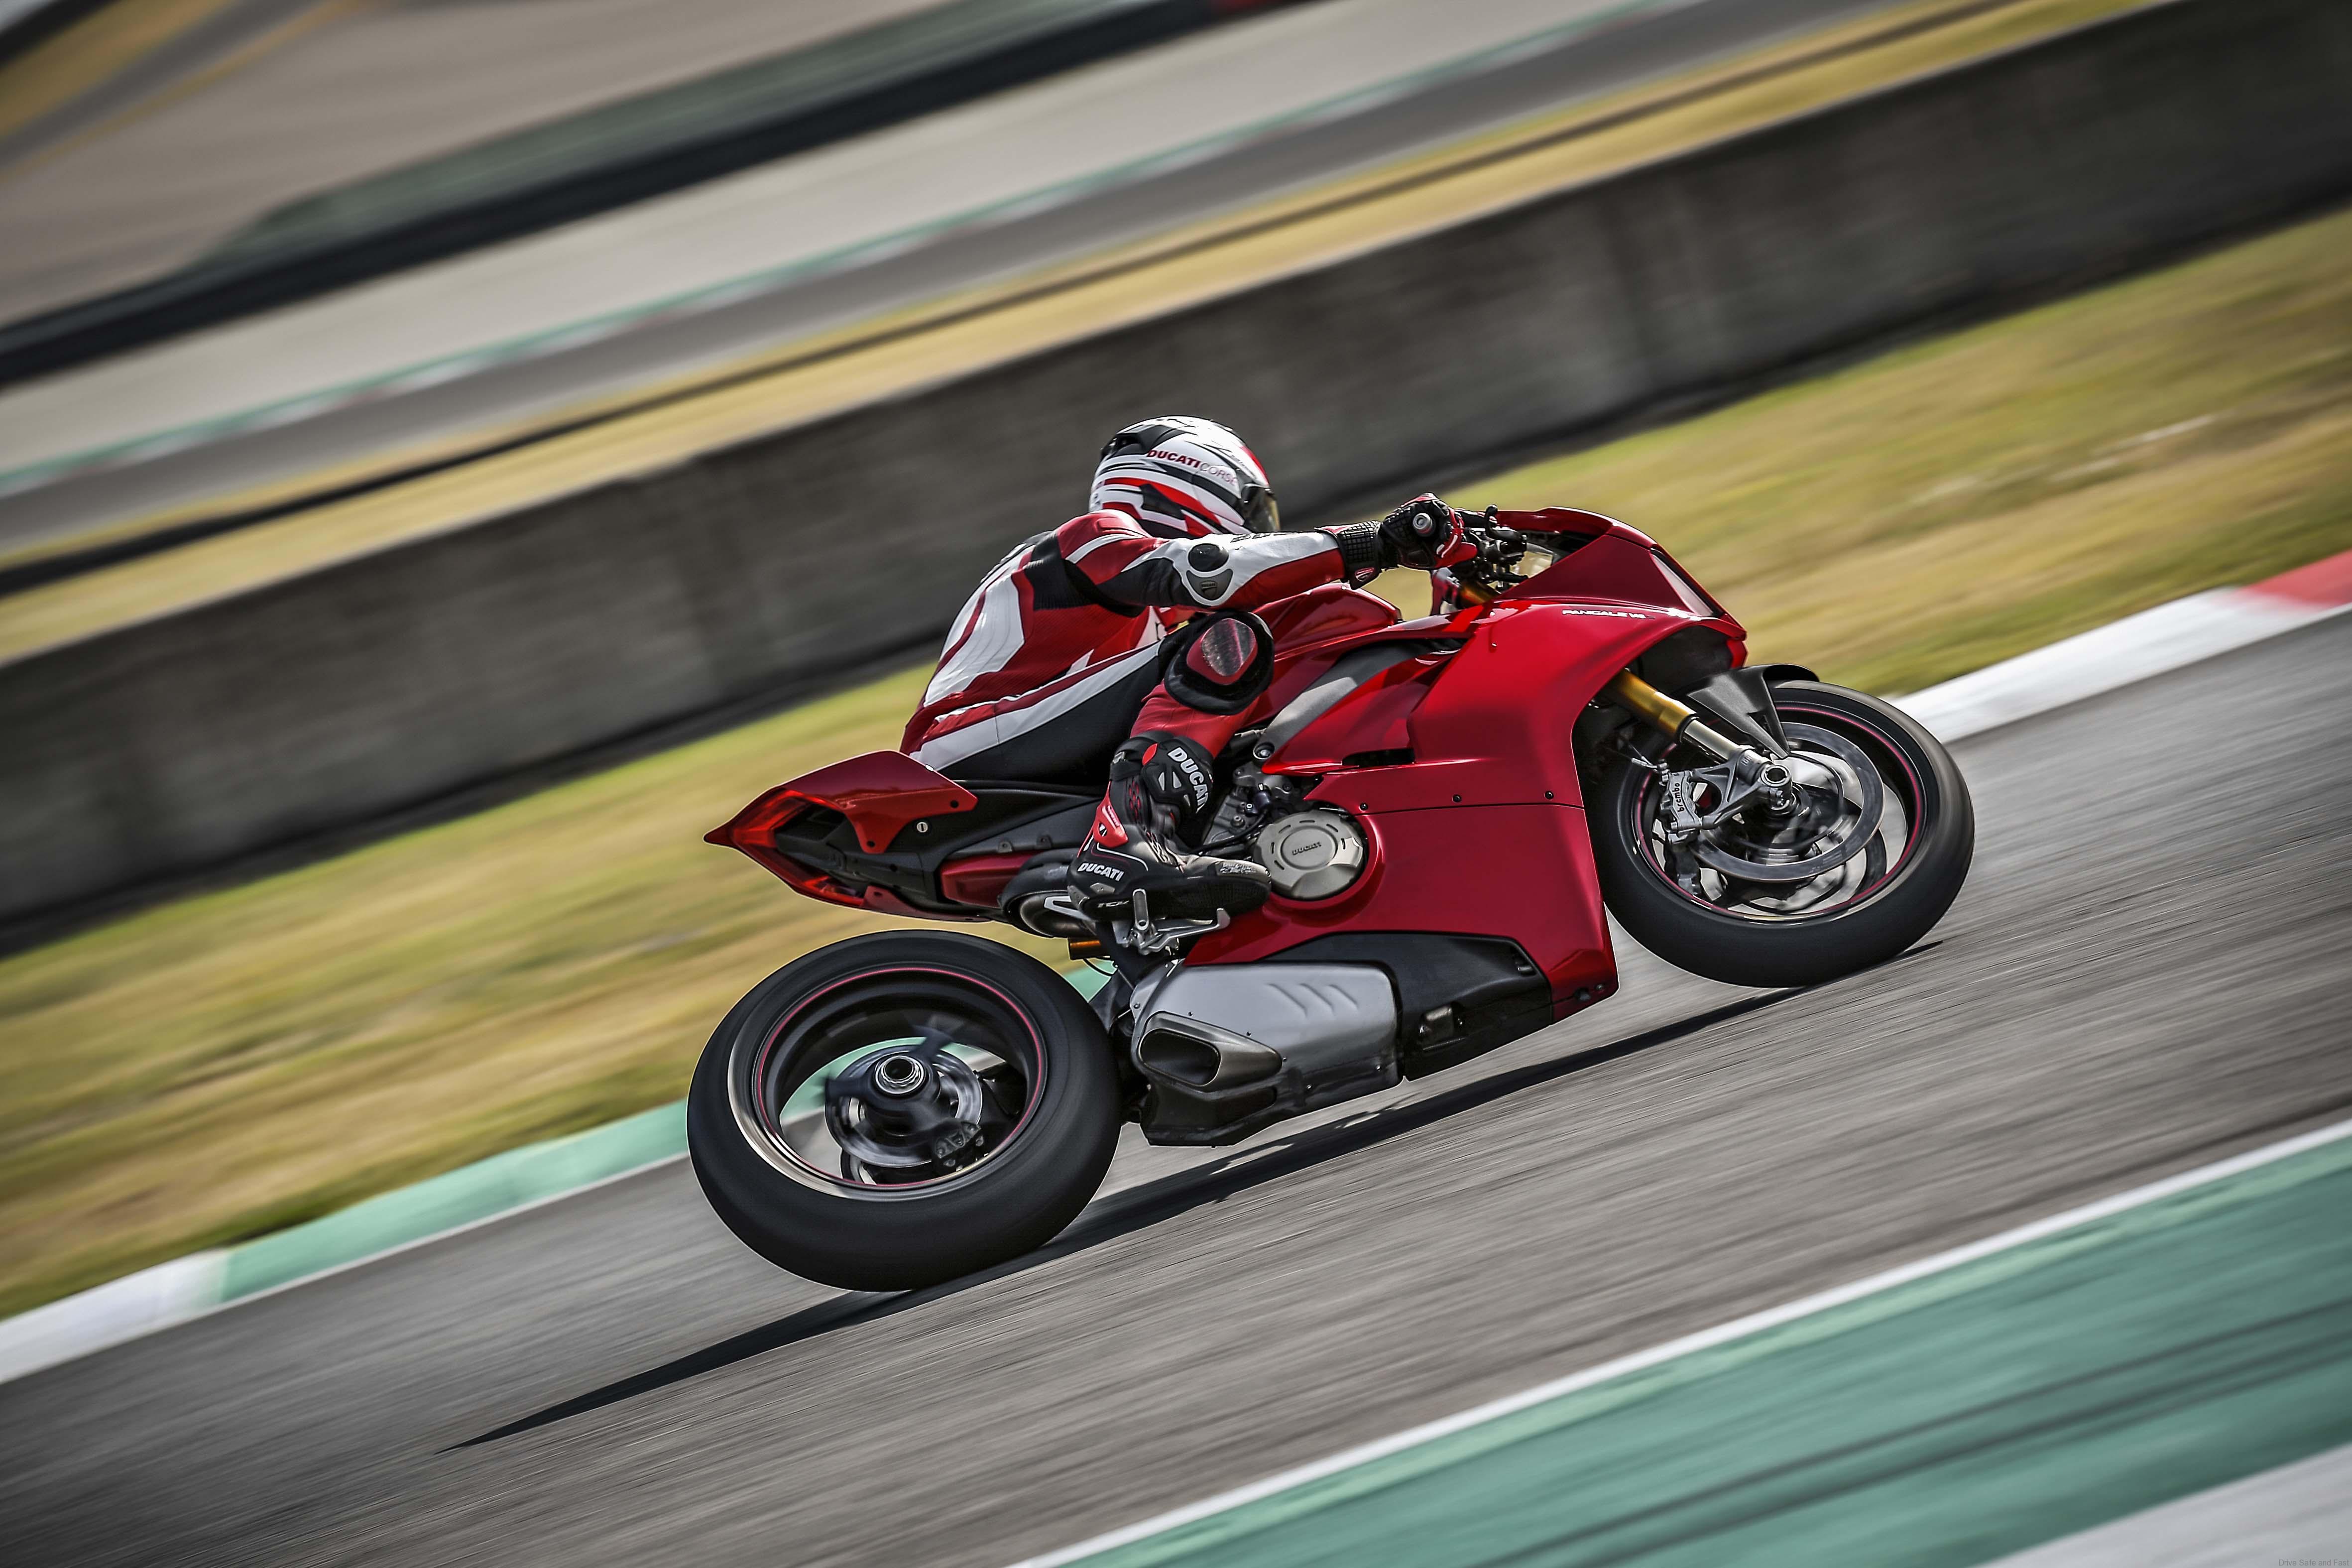 Ducati’s Panigale V4 Speciale need to know facts